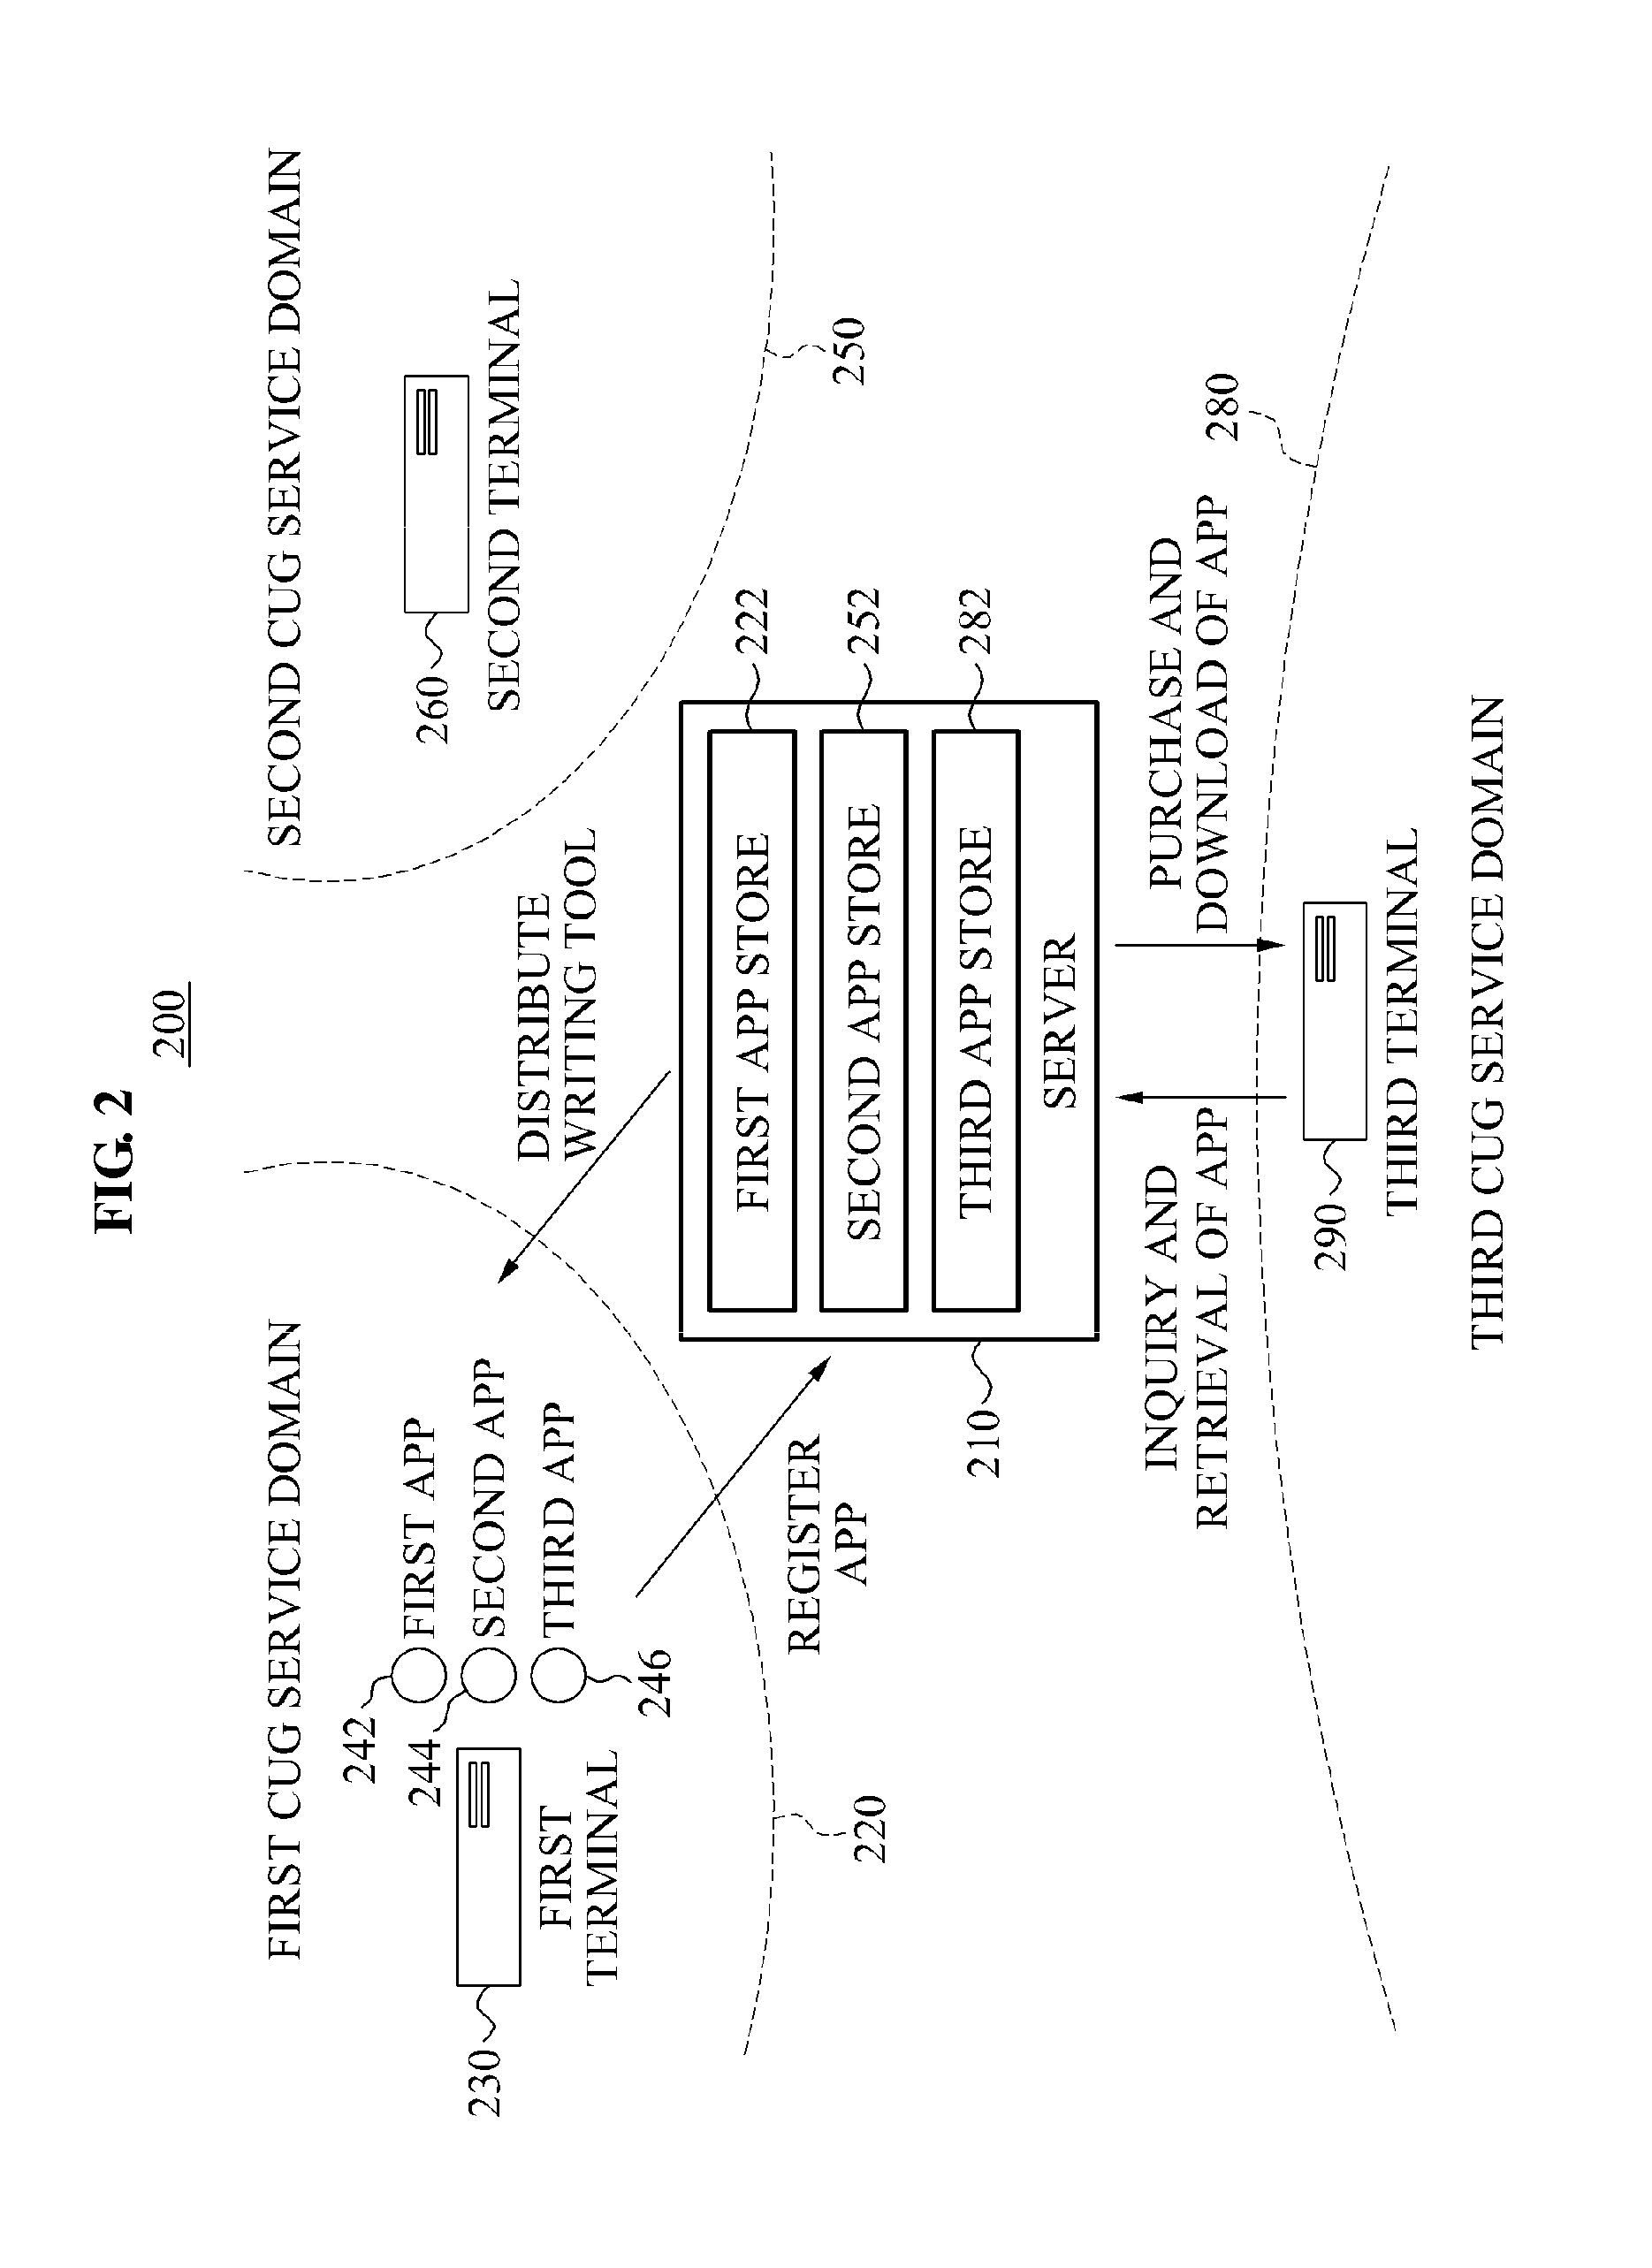 Apparatus for providing service linking closed user groups based on smart television and smart set-top box